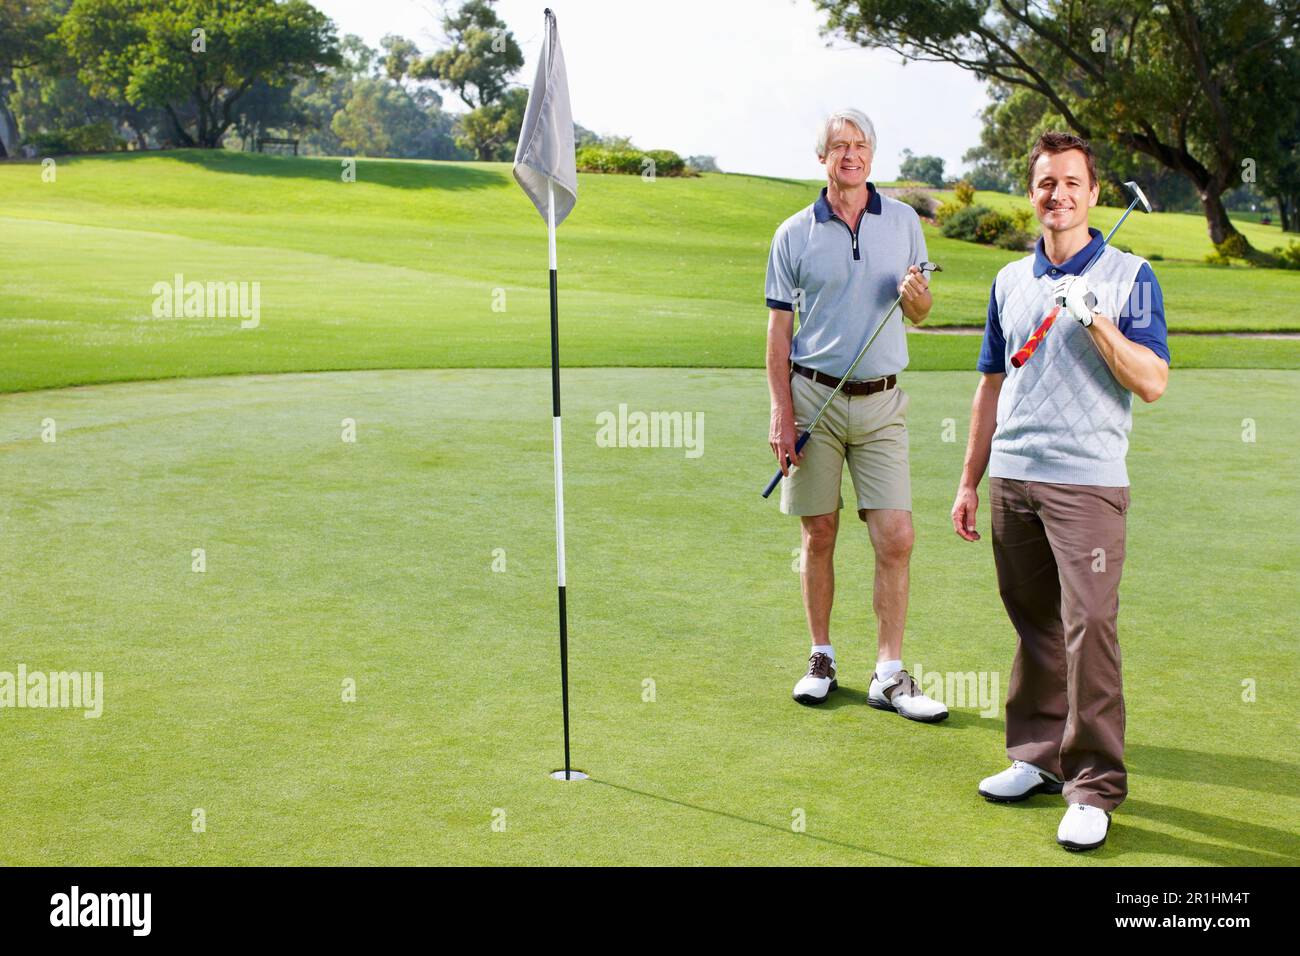 Father and son playing golf. Full length of smiling father and son standing on the putting green with golf clubs. Stock Photo